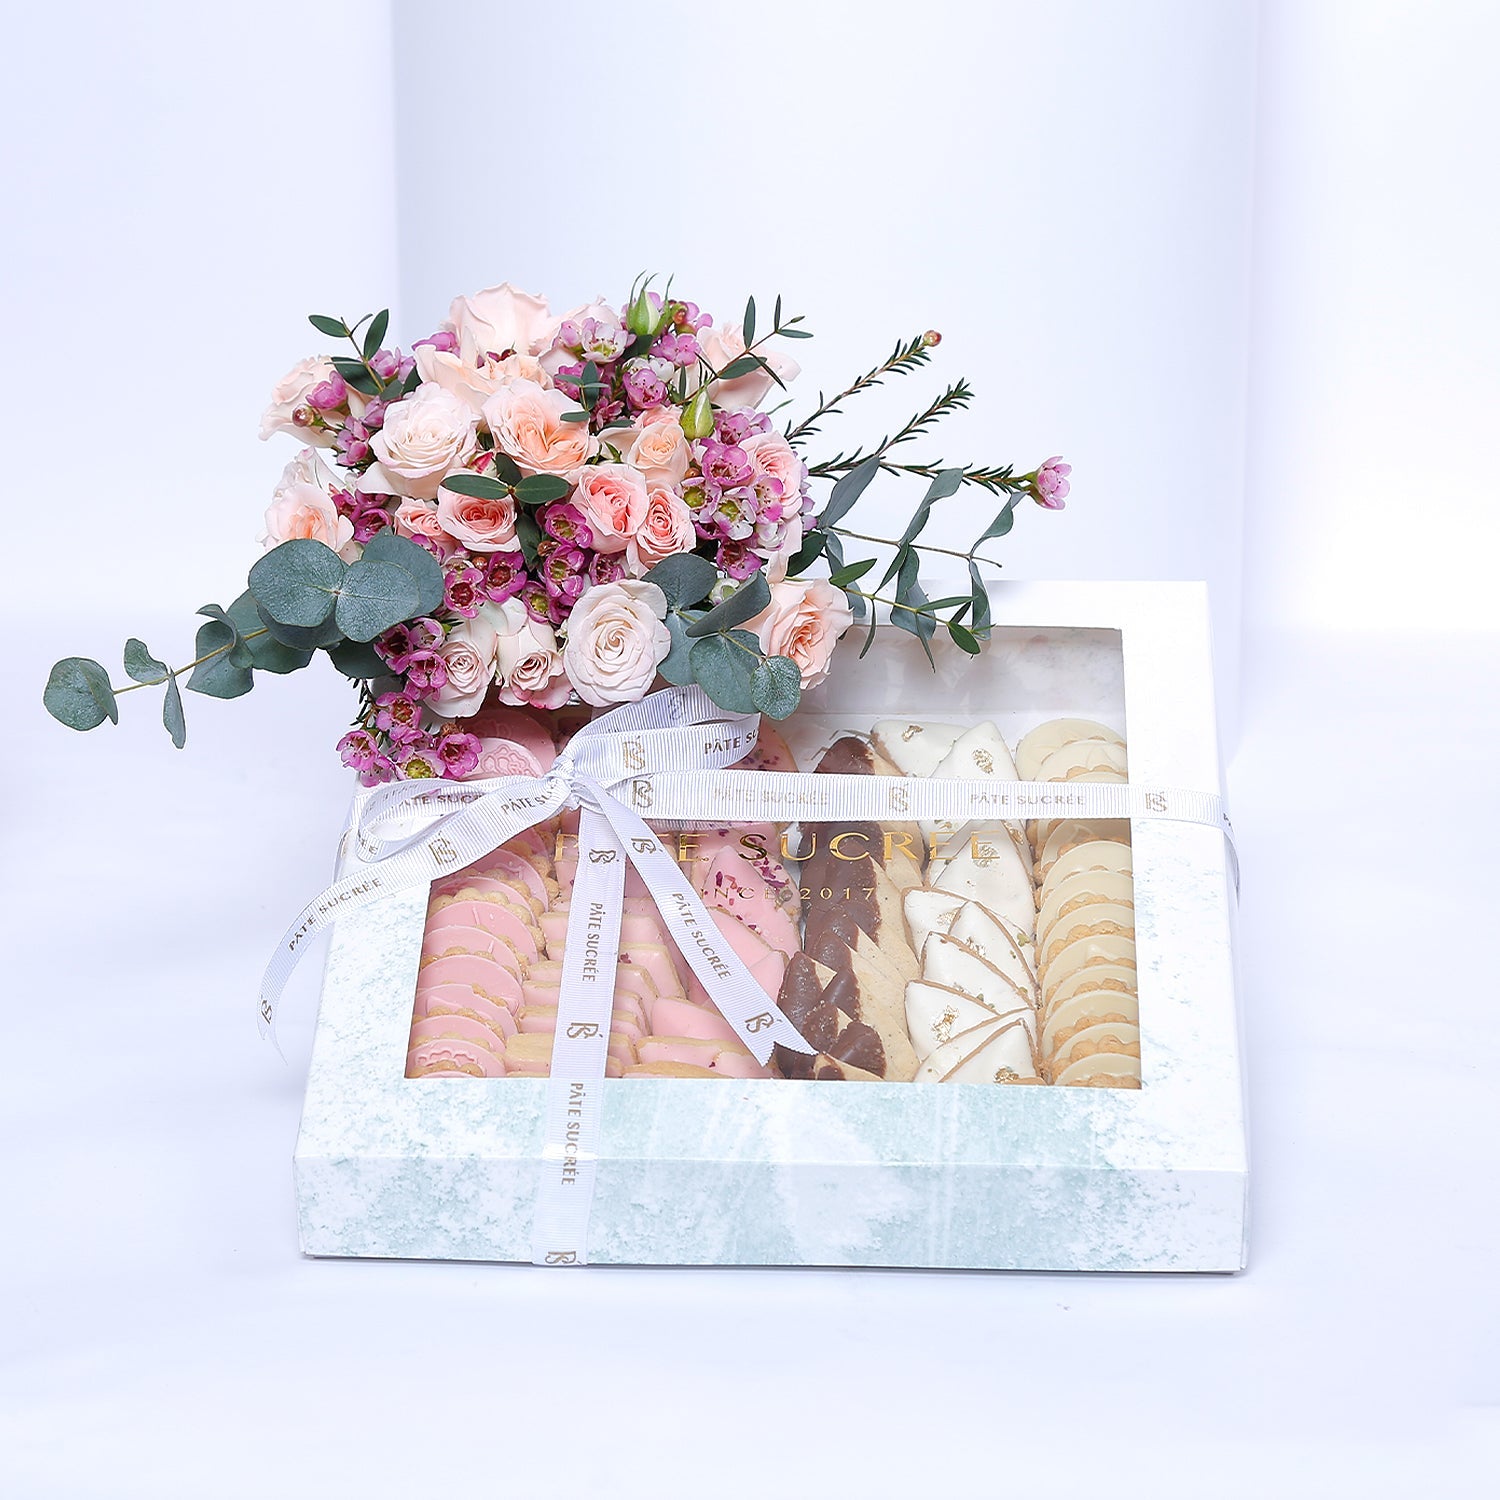 Mix Sweets Box Decorated with Flowers